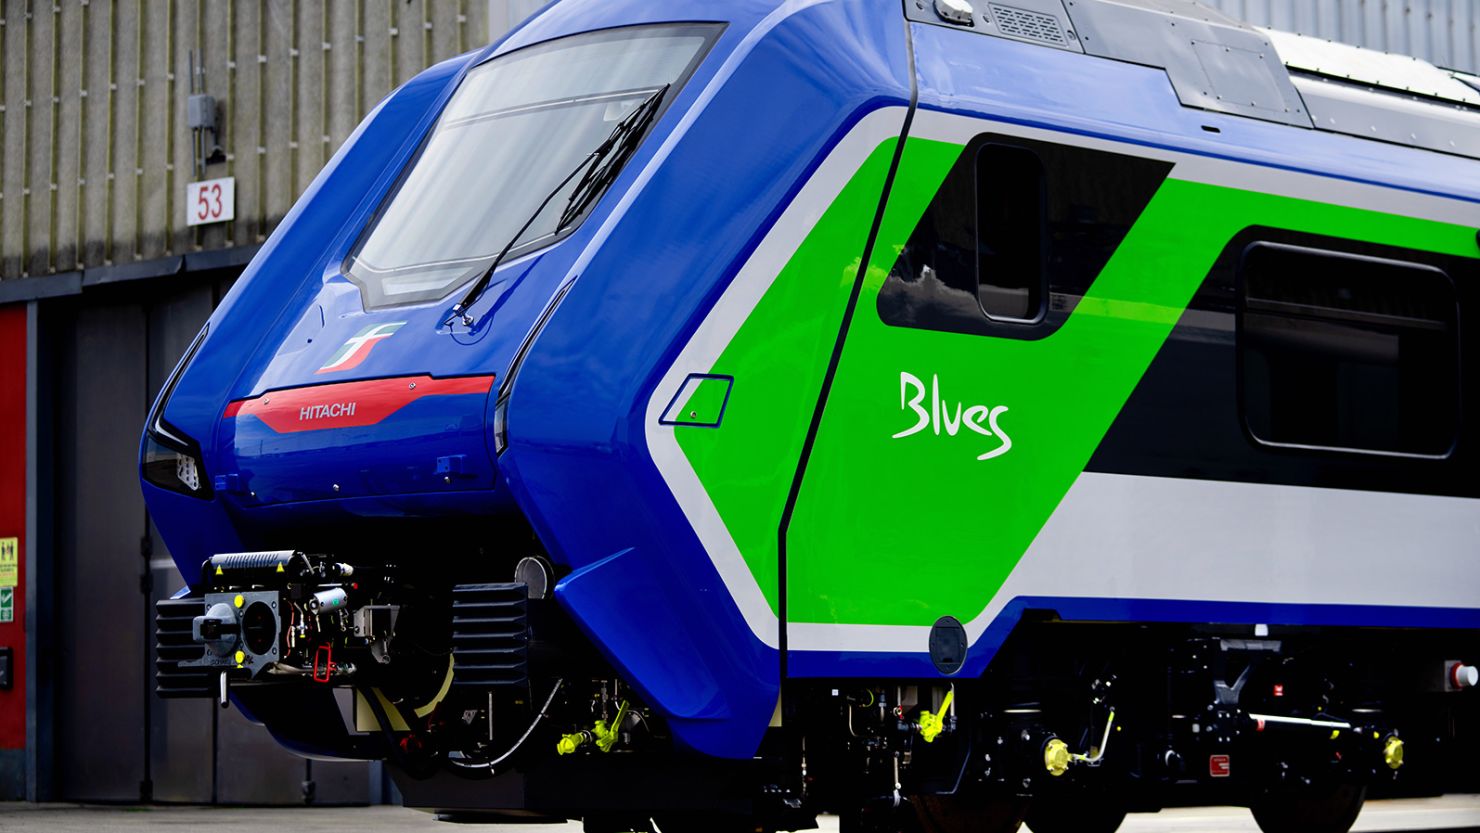 The Masaccio is Europe's first battery-powered train.